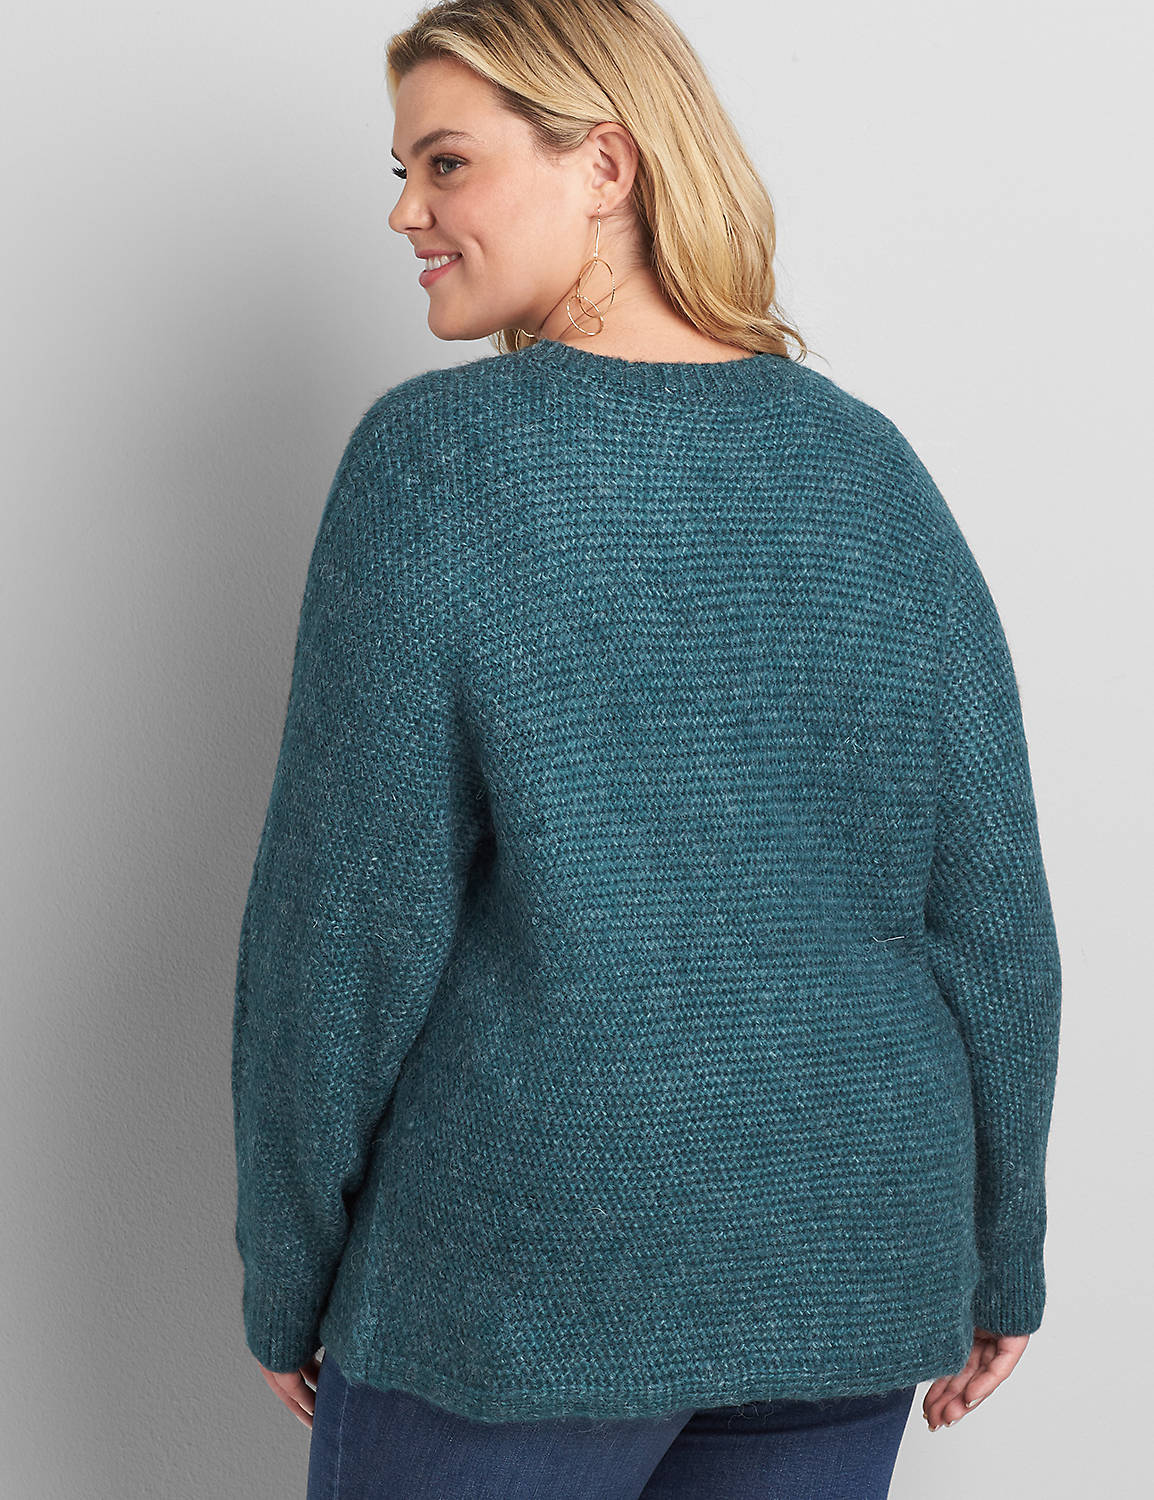 Long Sleeve Crew Neck Pullover with Horizontal Cable 1118269:PANTONE Deep Teal:22/24 Product Image 2